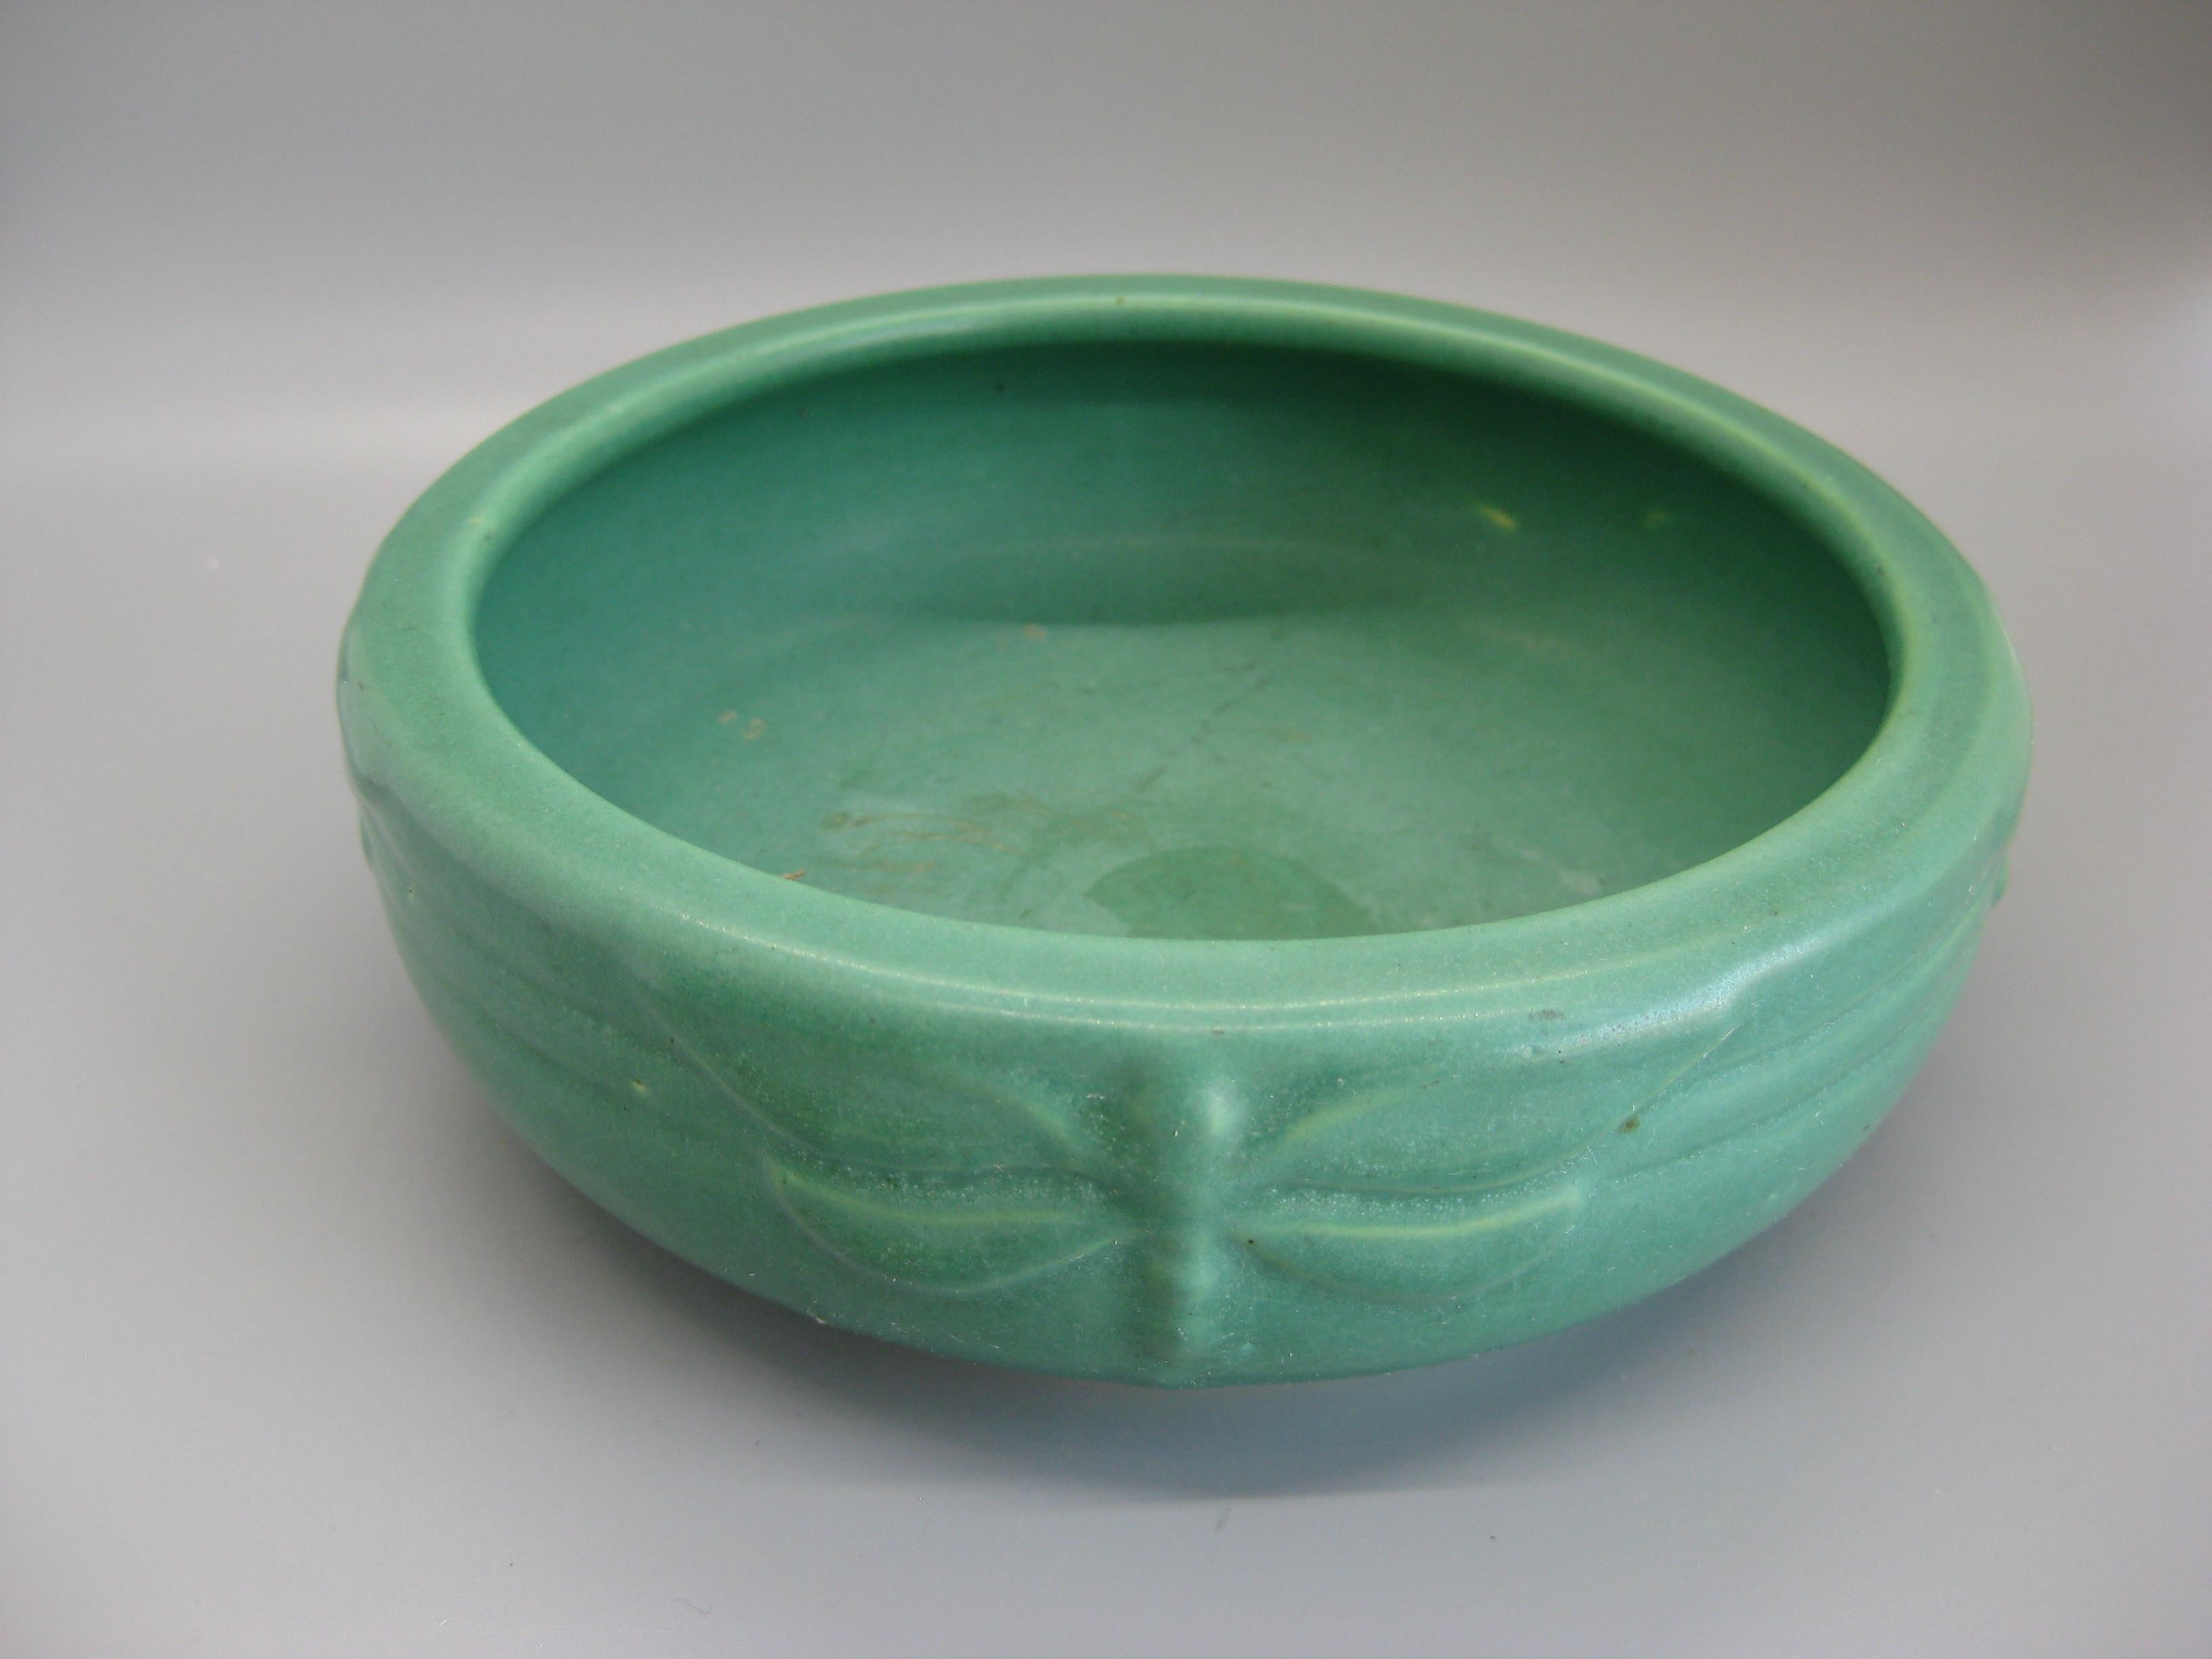 Wonderful Arts & Crafts green matte art pottery bowl made by Peters & Reed in Zanesville, Ohio. Dates from the early 1900s. Wonderful color and shape. Has dragonflies around the sides as decorations. Would look great in any Arts & Crafts decor. In